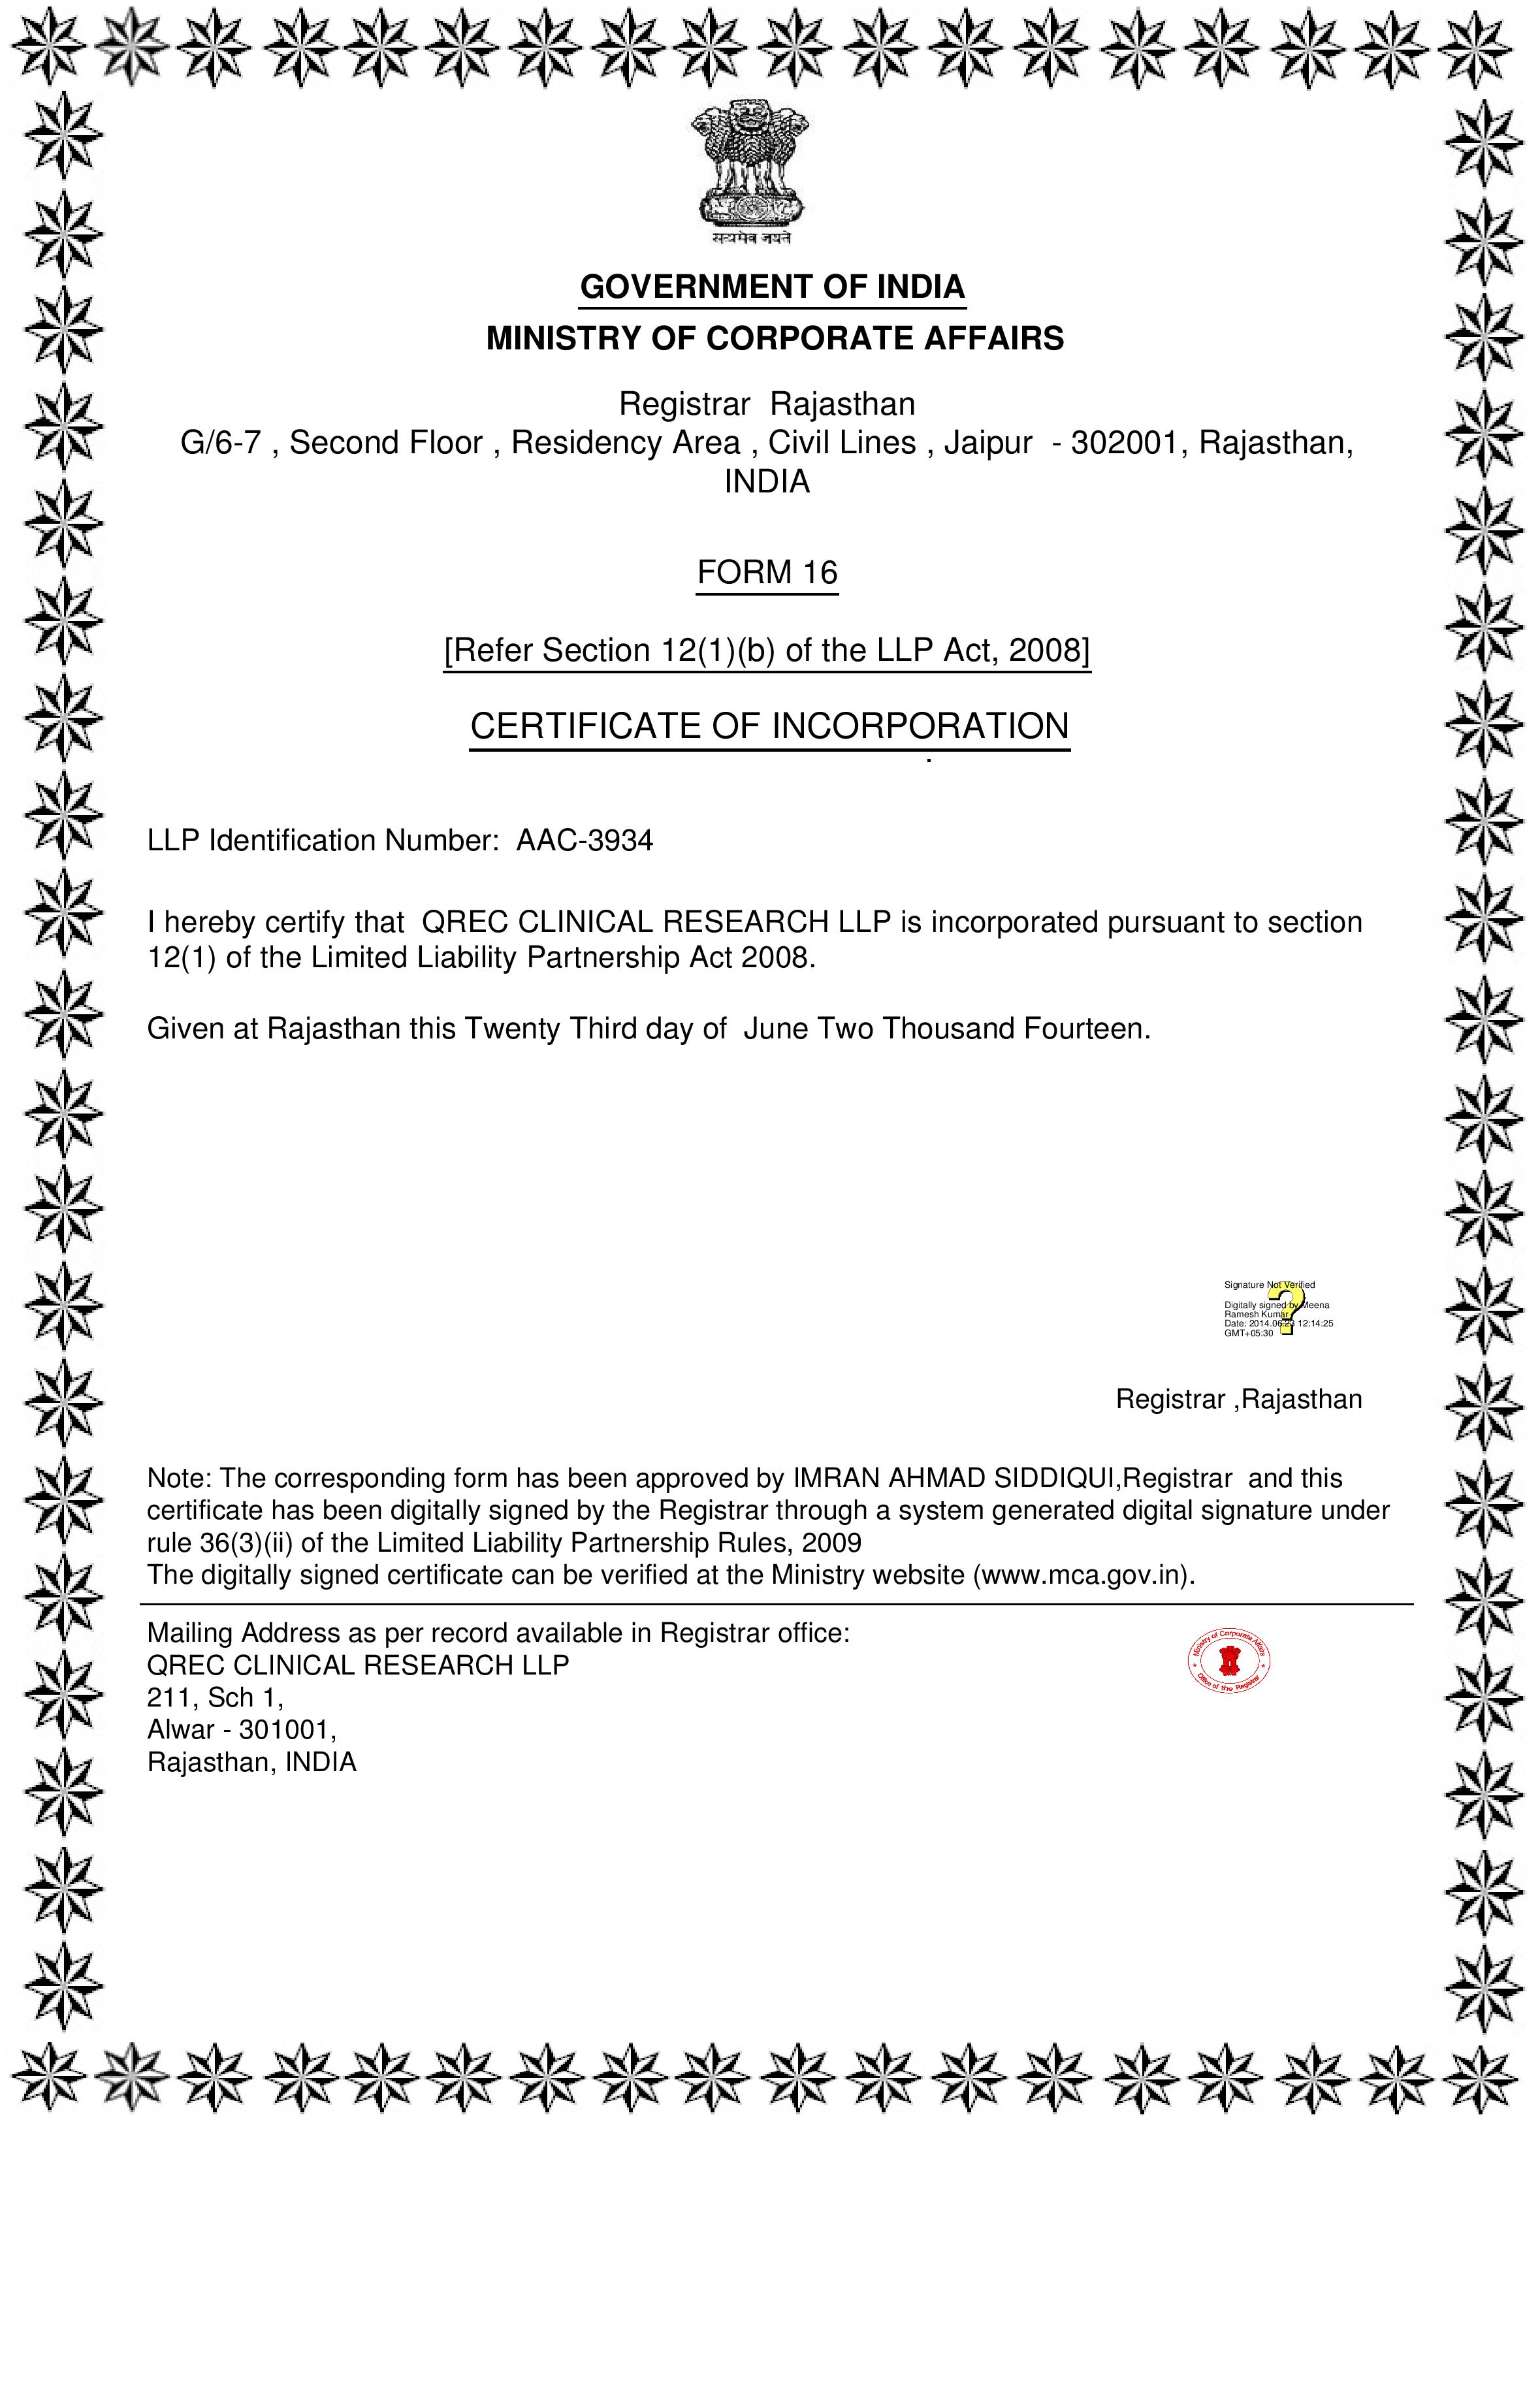 Certificate_of_Incorporation_-_QREC